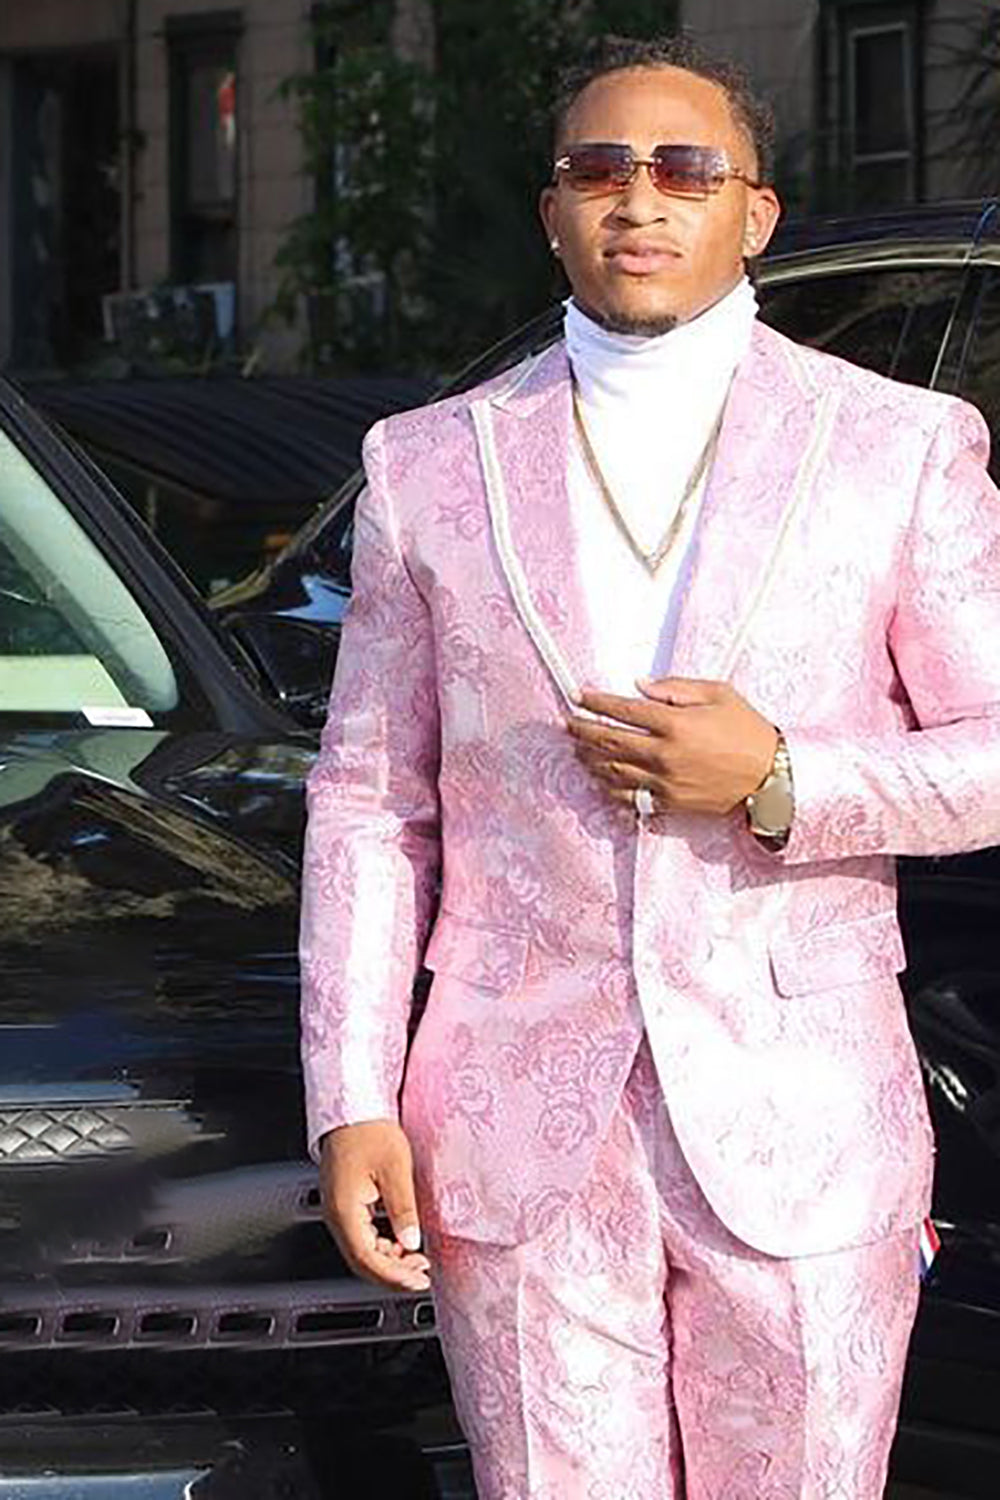 Pink Prom Suits - Light Pink Prom Suit